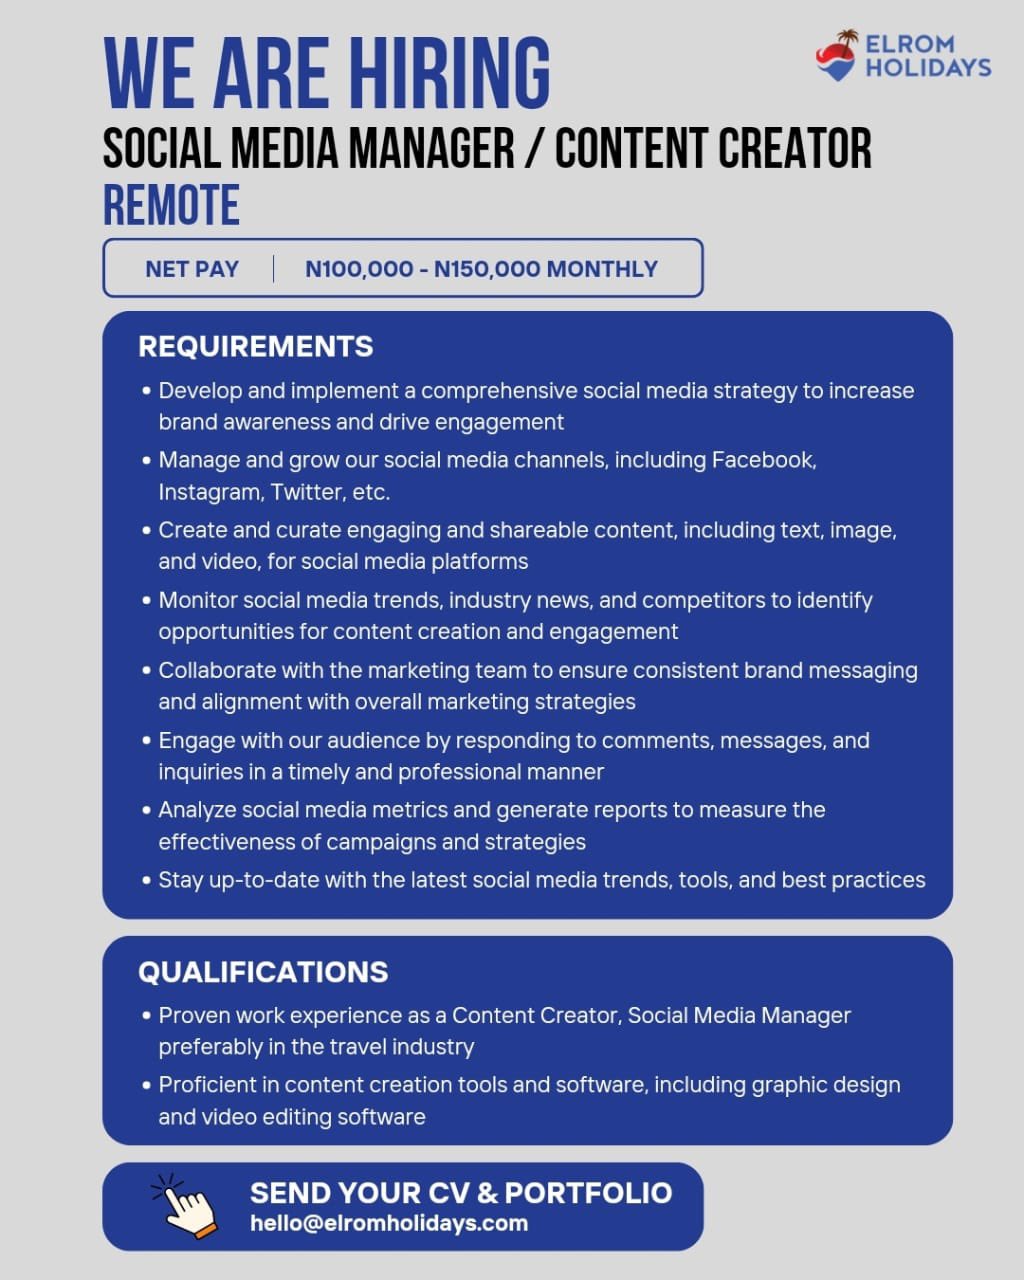 Remote Social Media Manager / Content Creators Needed at Elrom Holidays